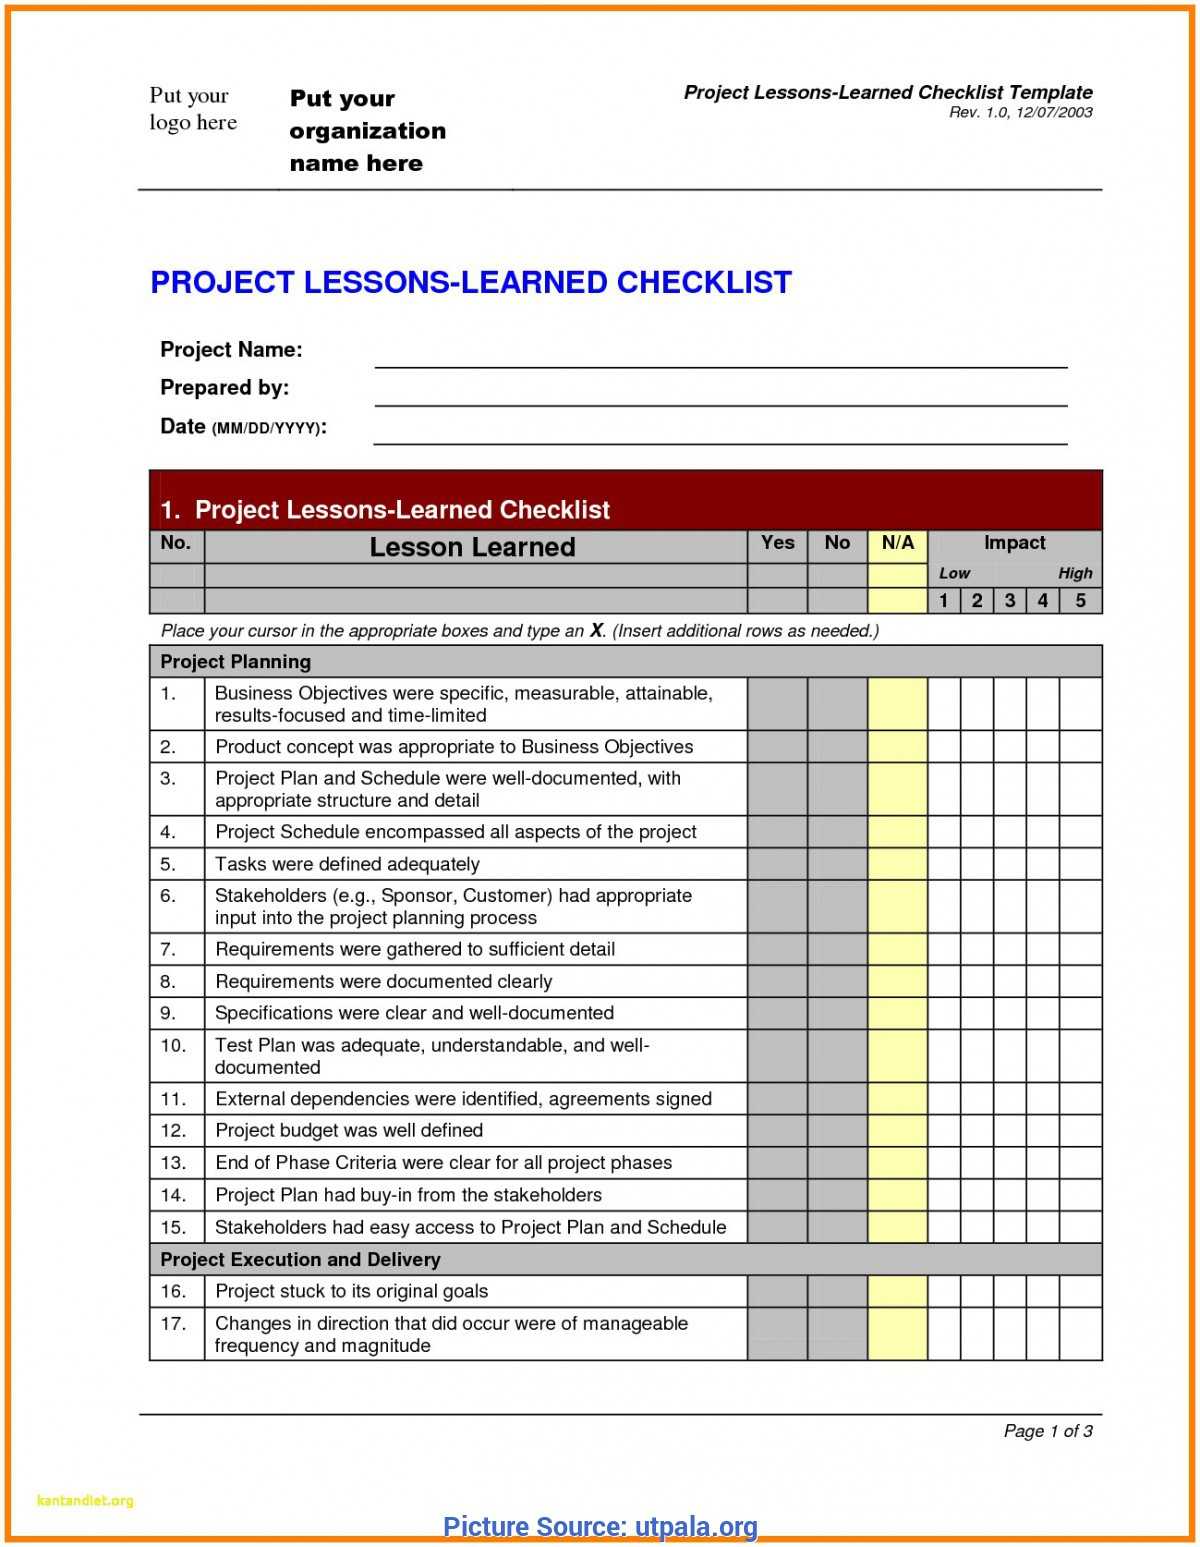 Fresh Lessons Learned Report Template Prince2 Prince2 Regarding Prince2 Lessons Learned Report Template